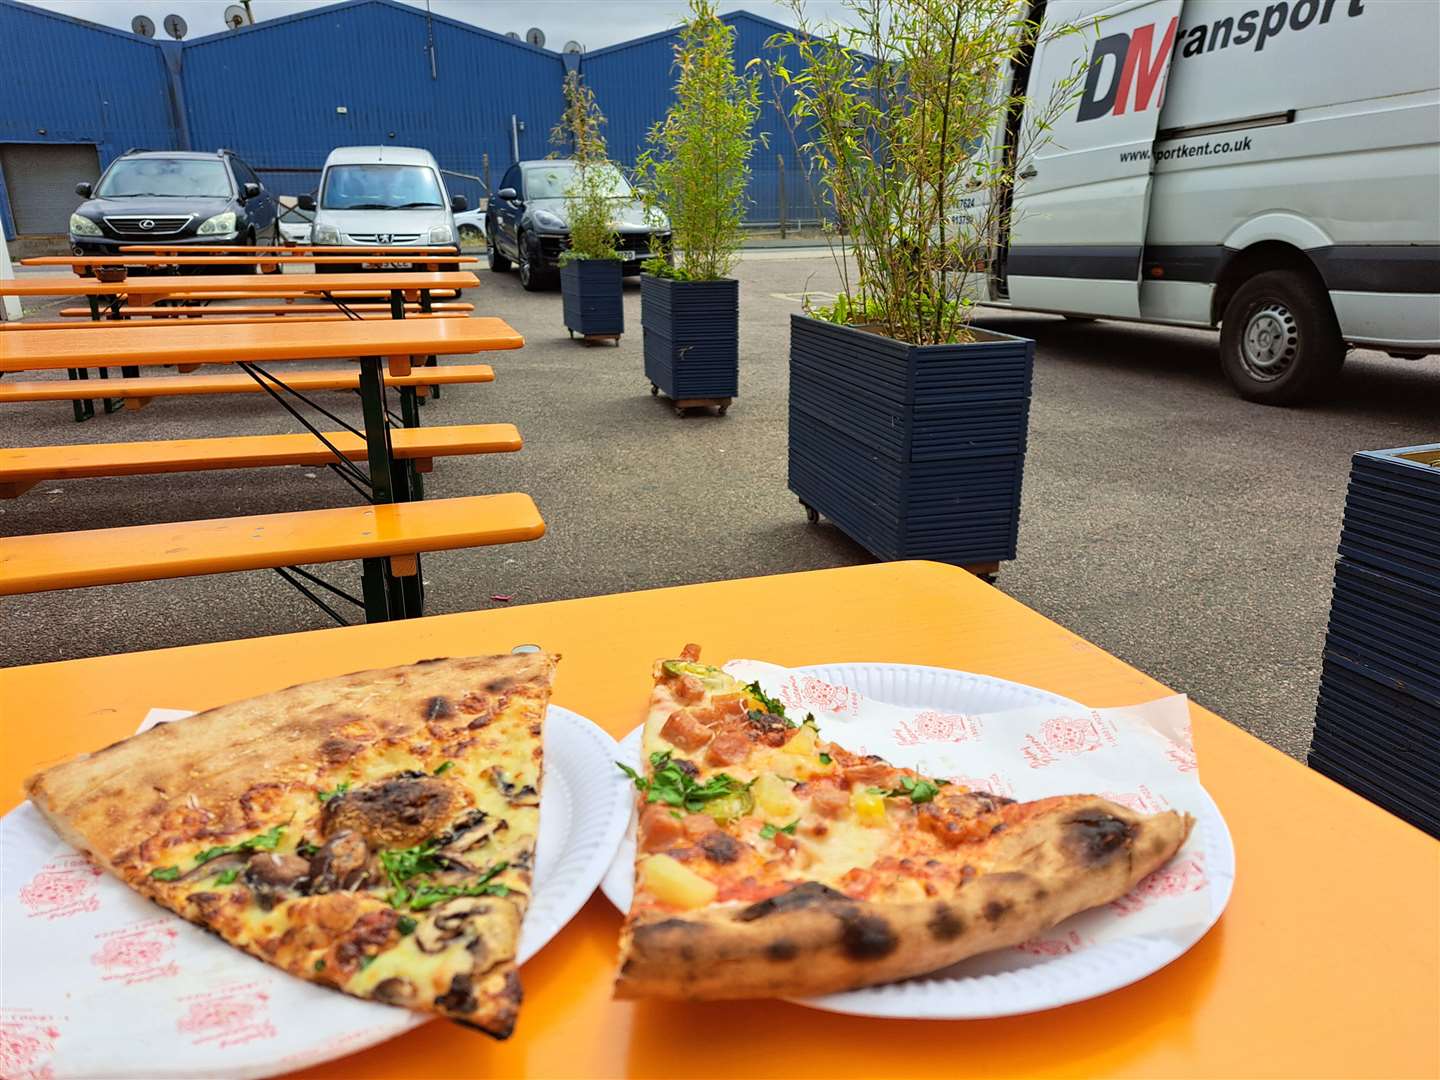 Who would have thought pizza in a car park would be so good?